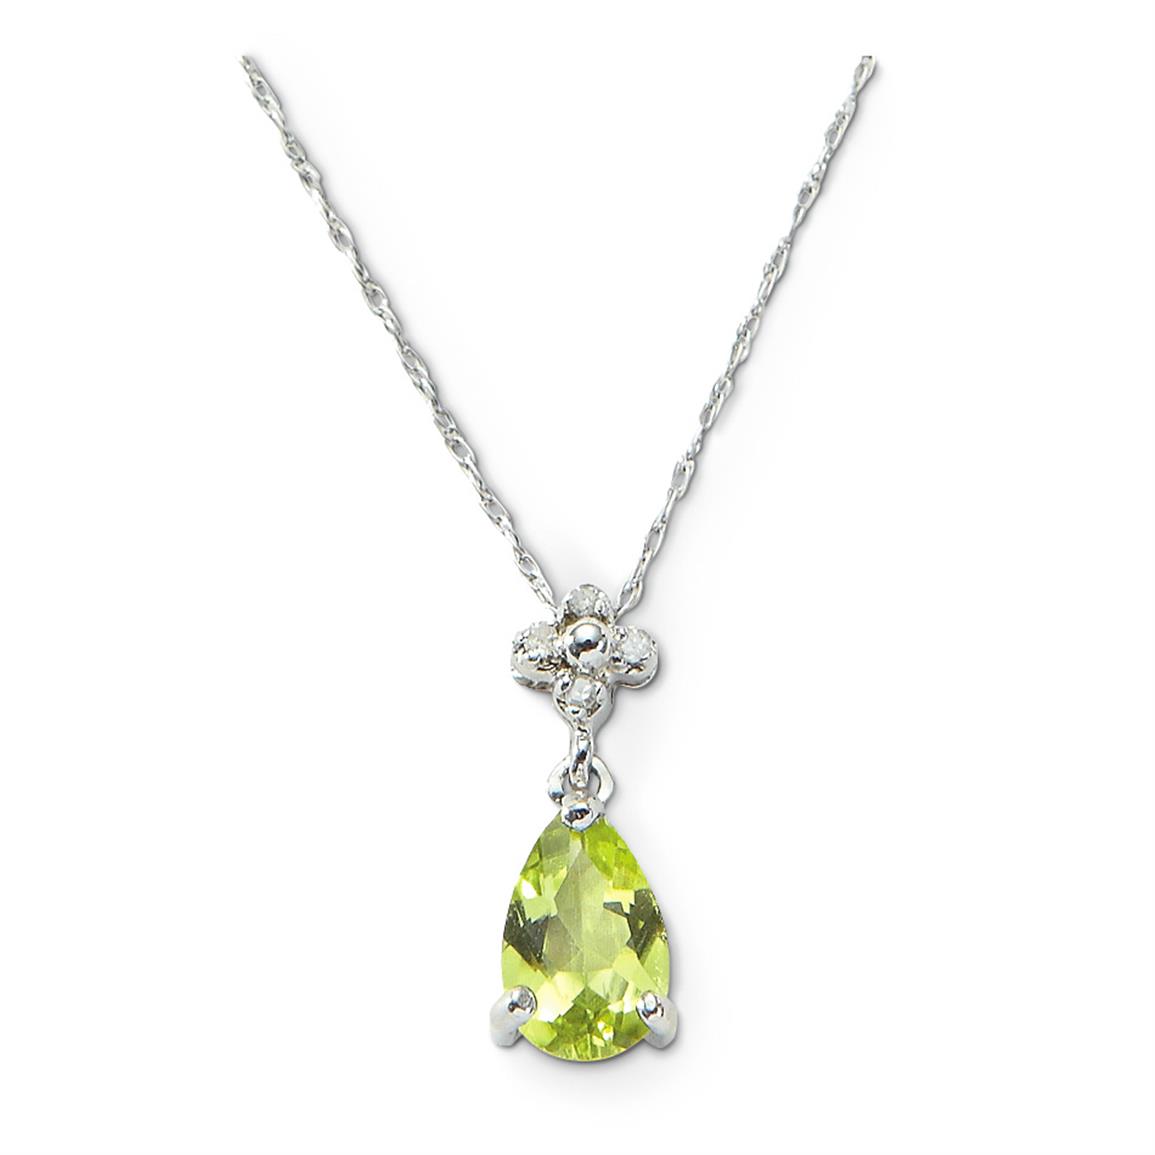 ... Accessories  Jewelry  10k White Gold Peridot with Diamonds Necklace